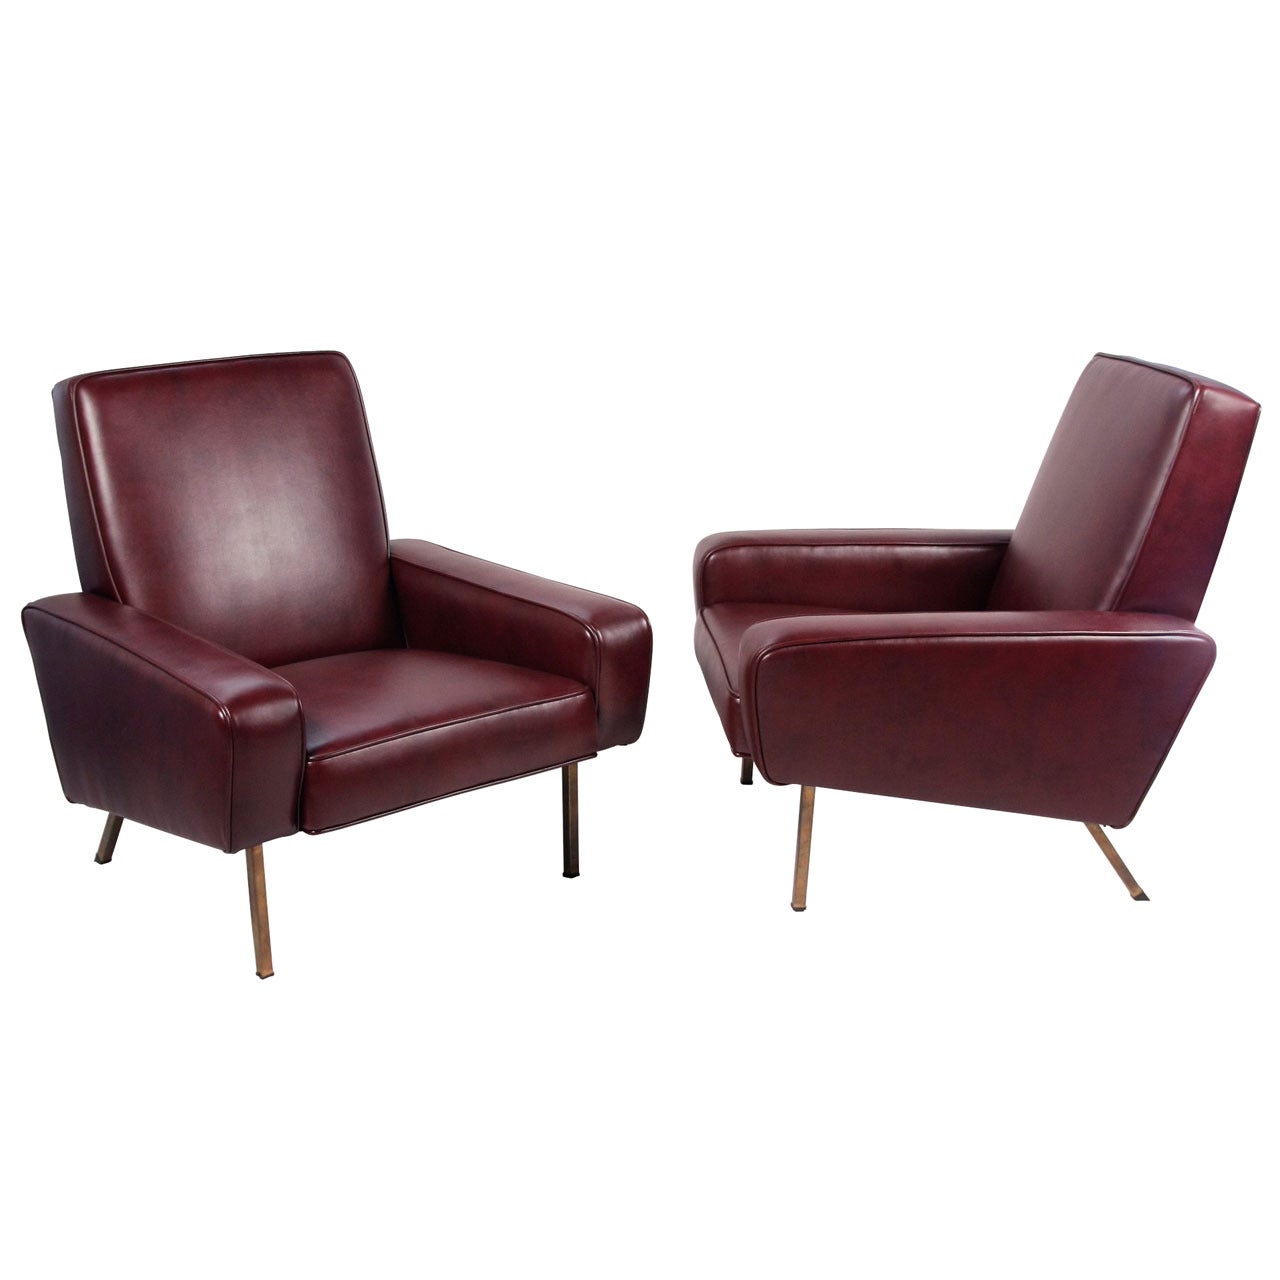 Airborne by Pierre Guariche, Pair of Armchairs